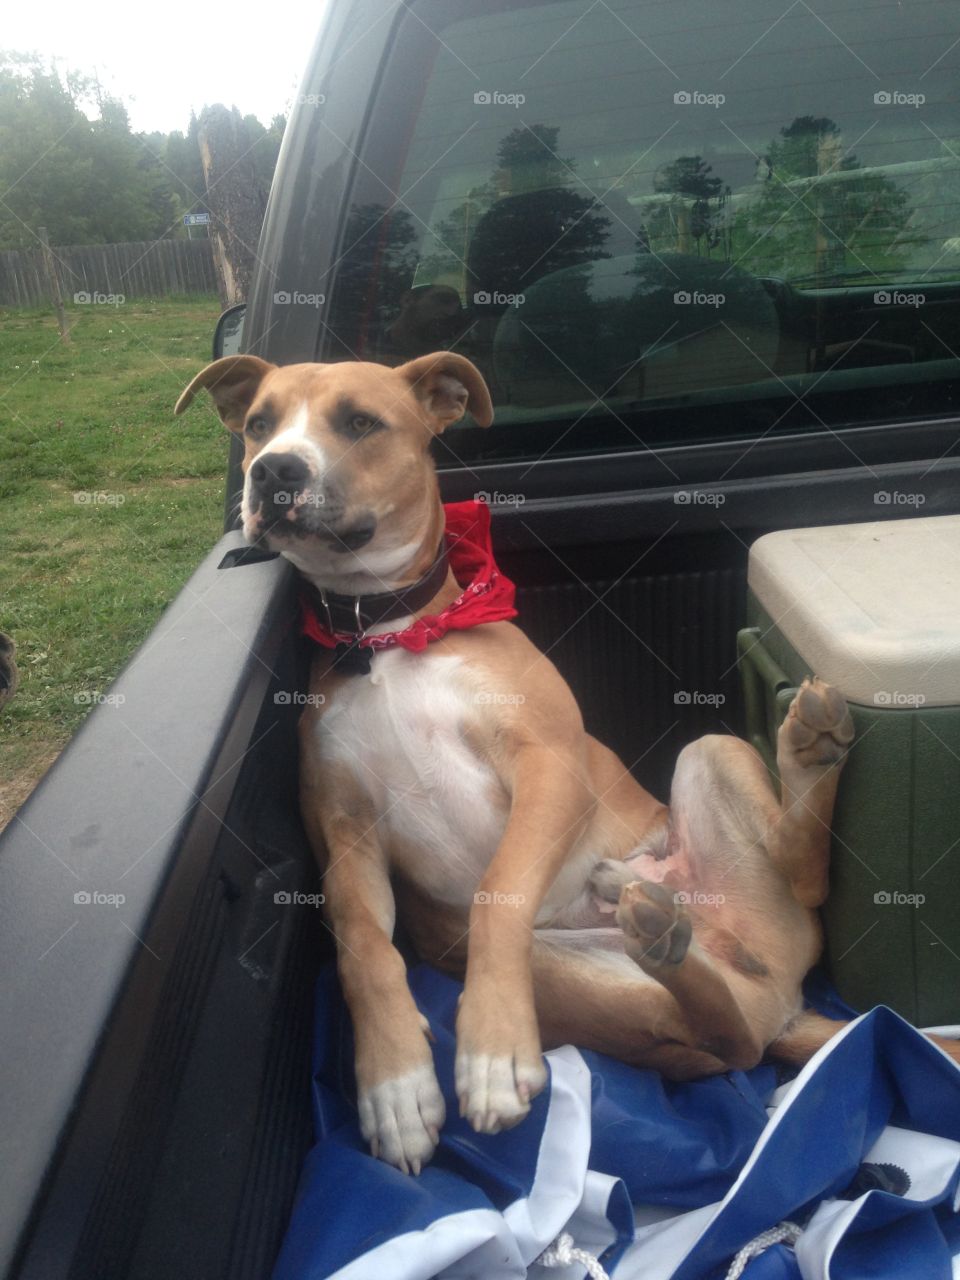 He loves to sit like this in the back of the truck. 